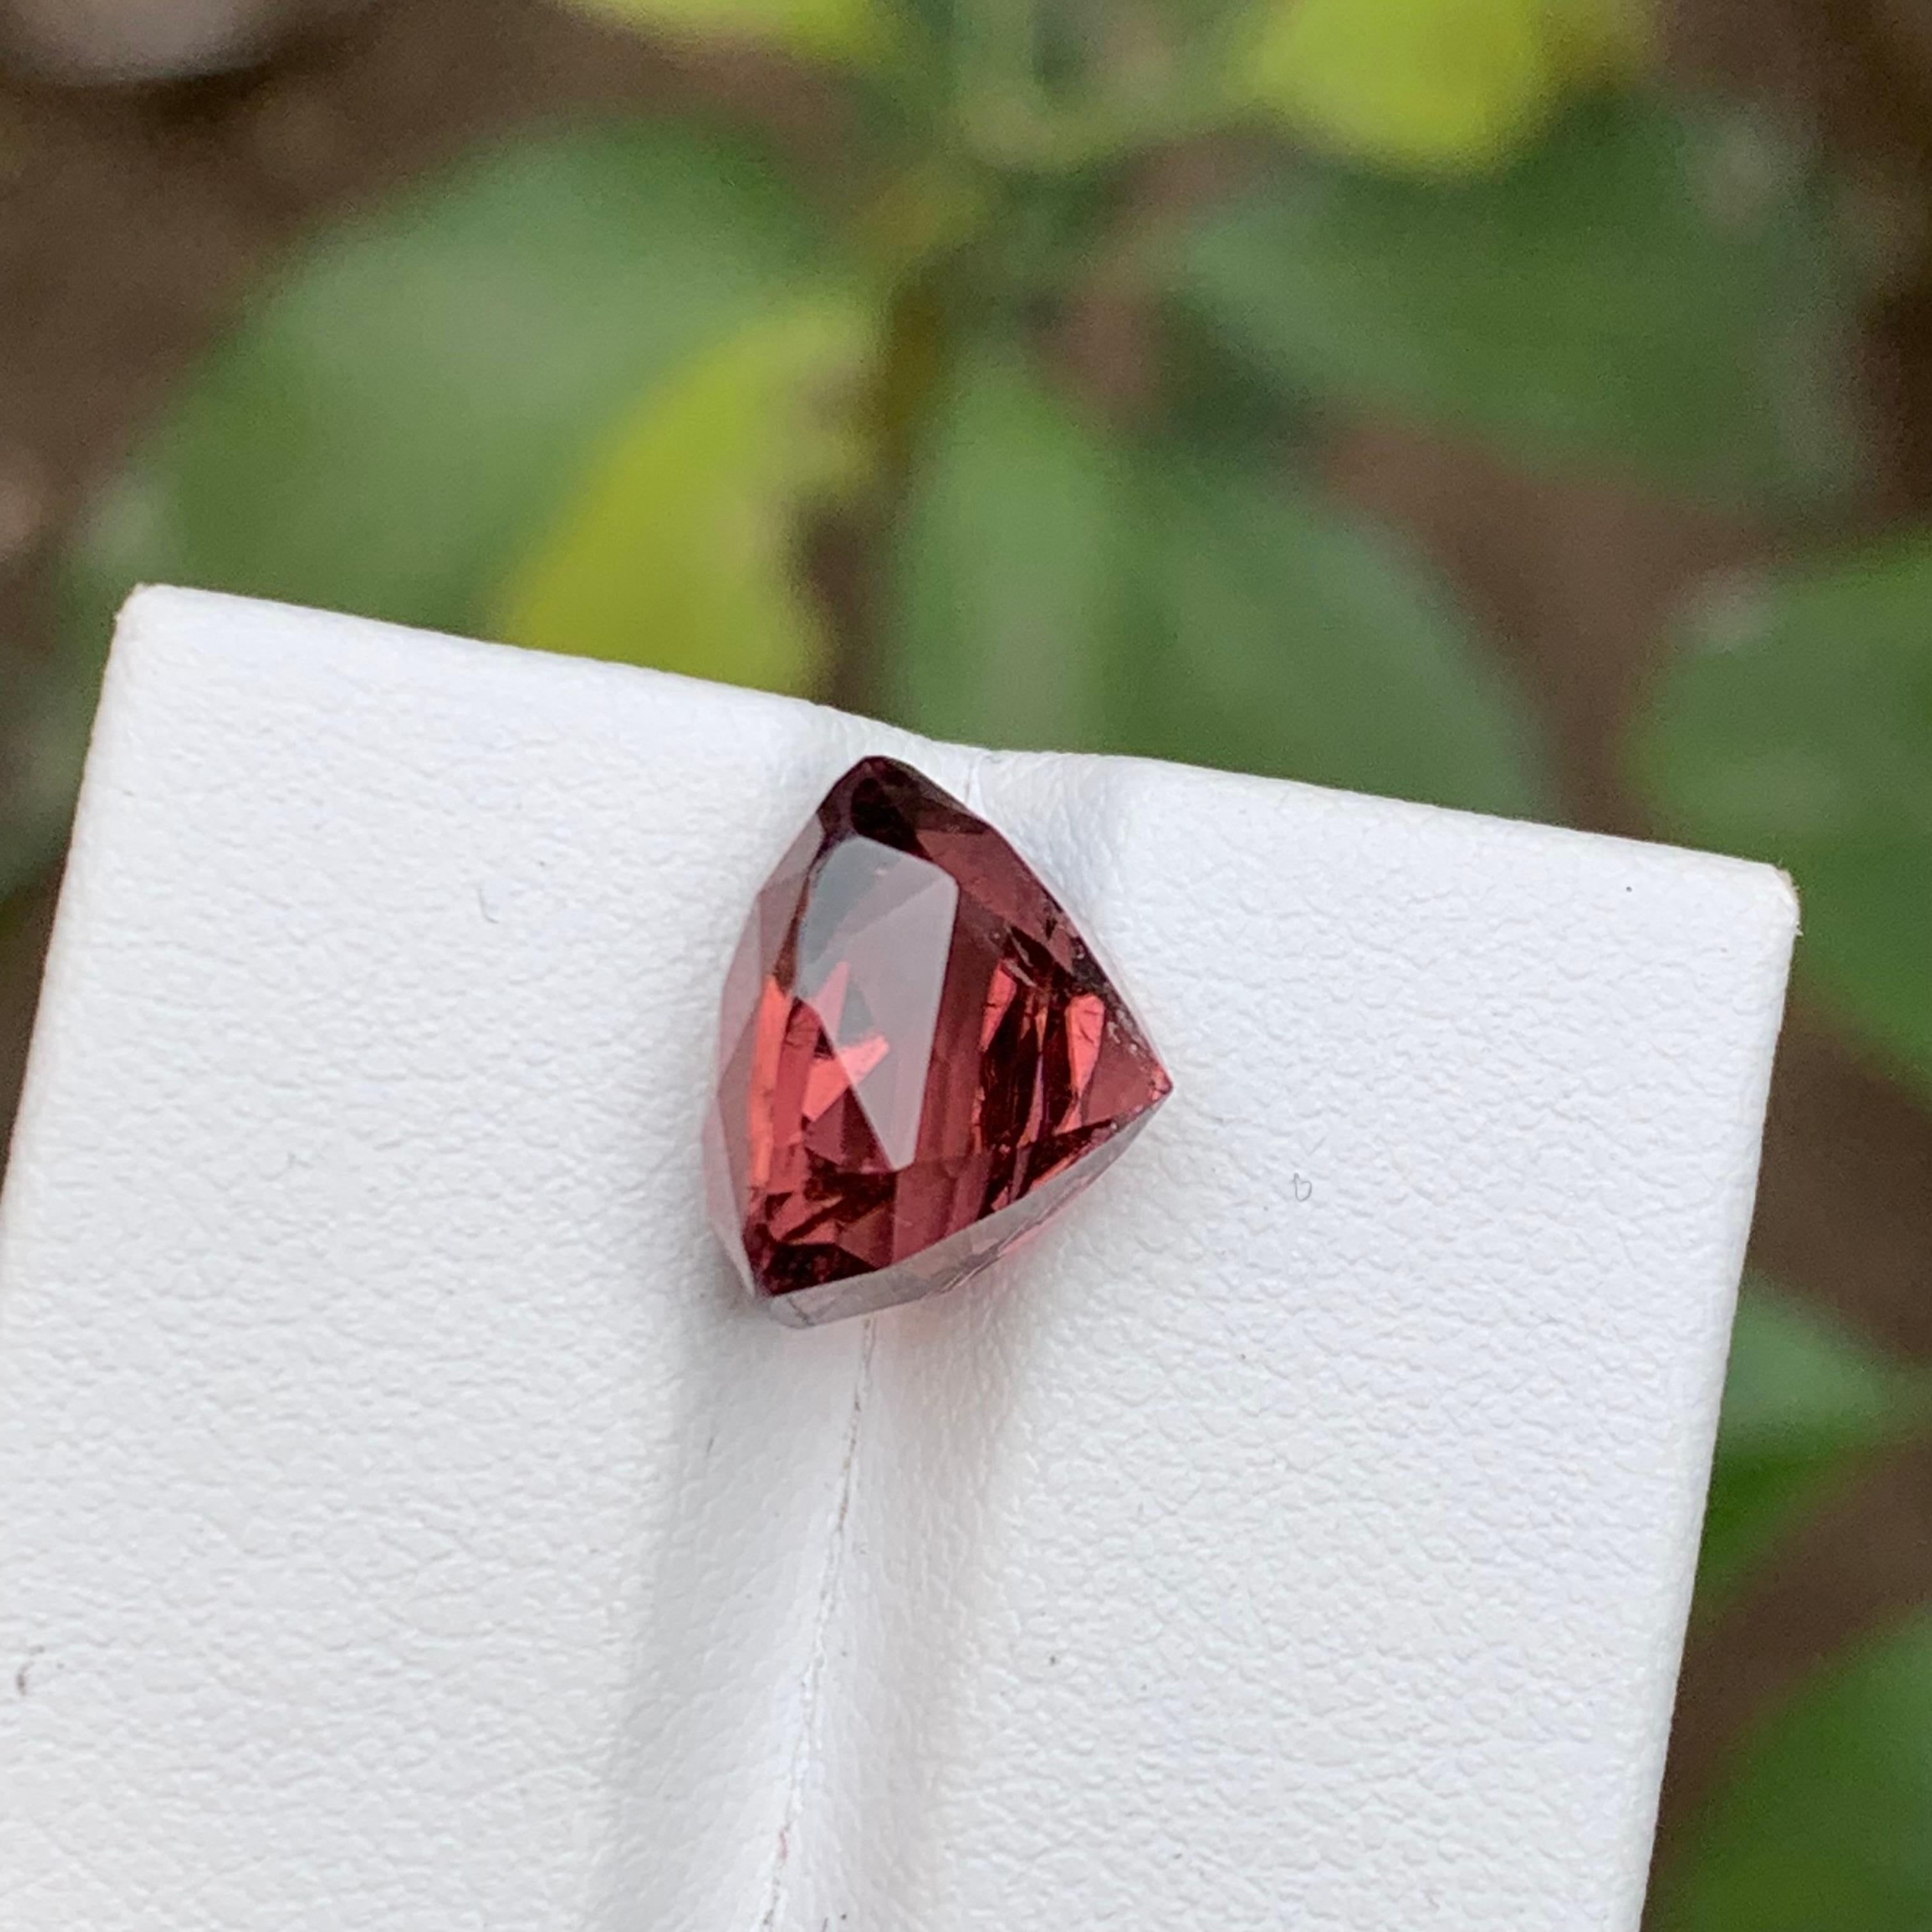 Rare Soft Pink Natural Tourmaline Gemstone, 7.50 Ct Cushion Cut for Ring/Pendant For Sale 1